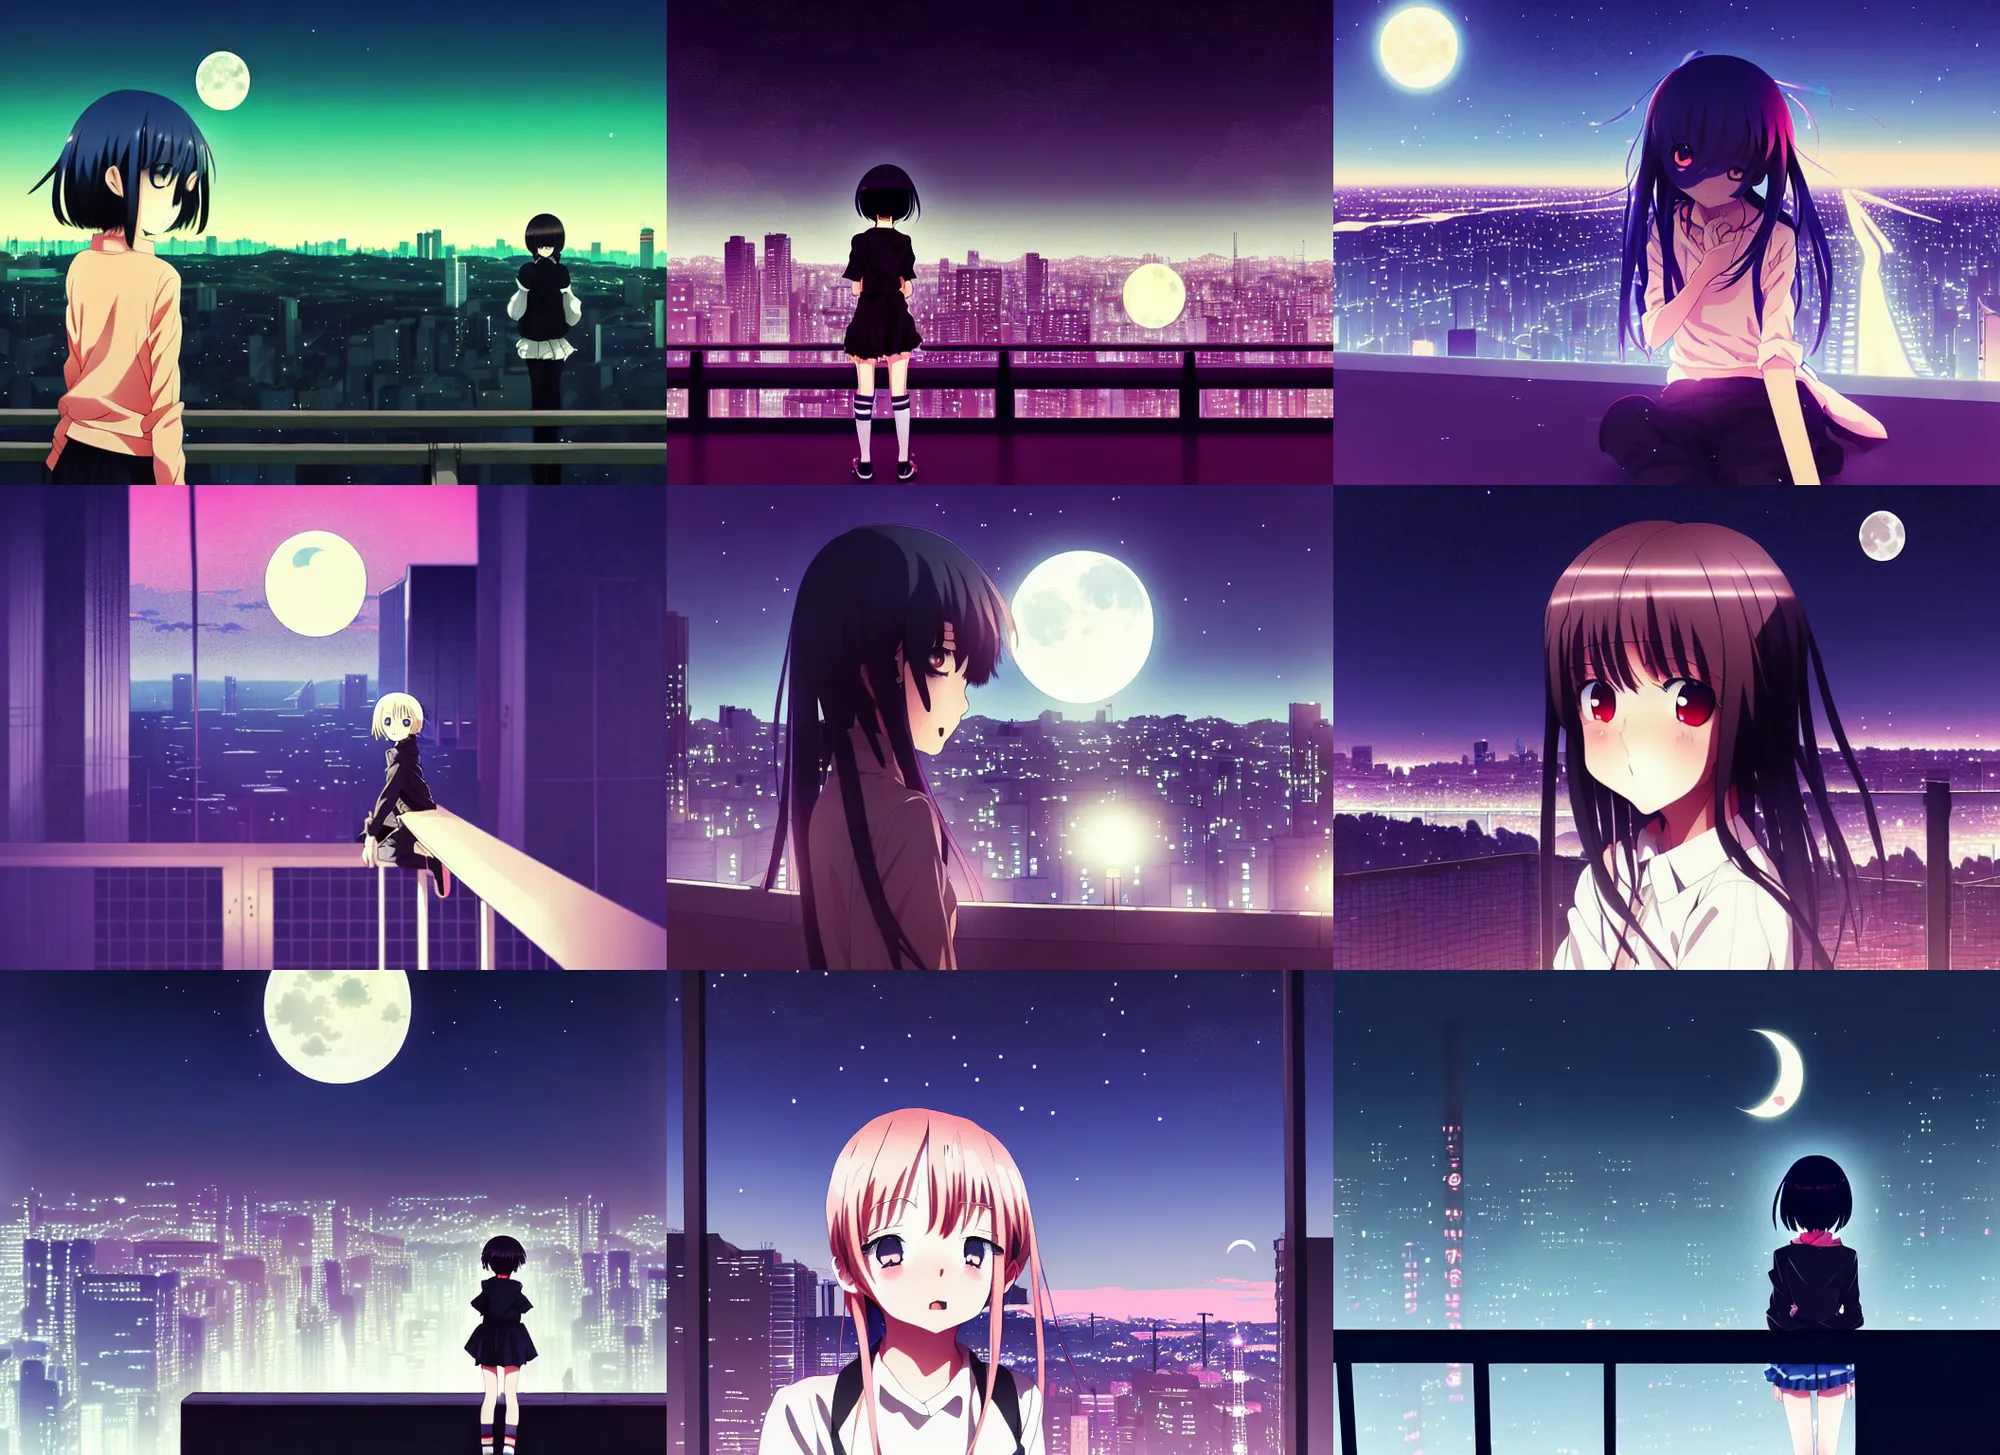 Prompt: anime visual, dark portrait from a distance of a young girl sightseeing above the city at night from, guardrails, moon, cute face by yoshinari yoh, ilya kuvshinov, moody, dynamic perspective pose, detailed facial features, kyoani, rounded eyes, crisp and sharp, cel shade, lomography, dark tint